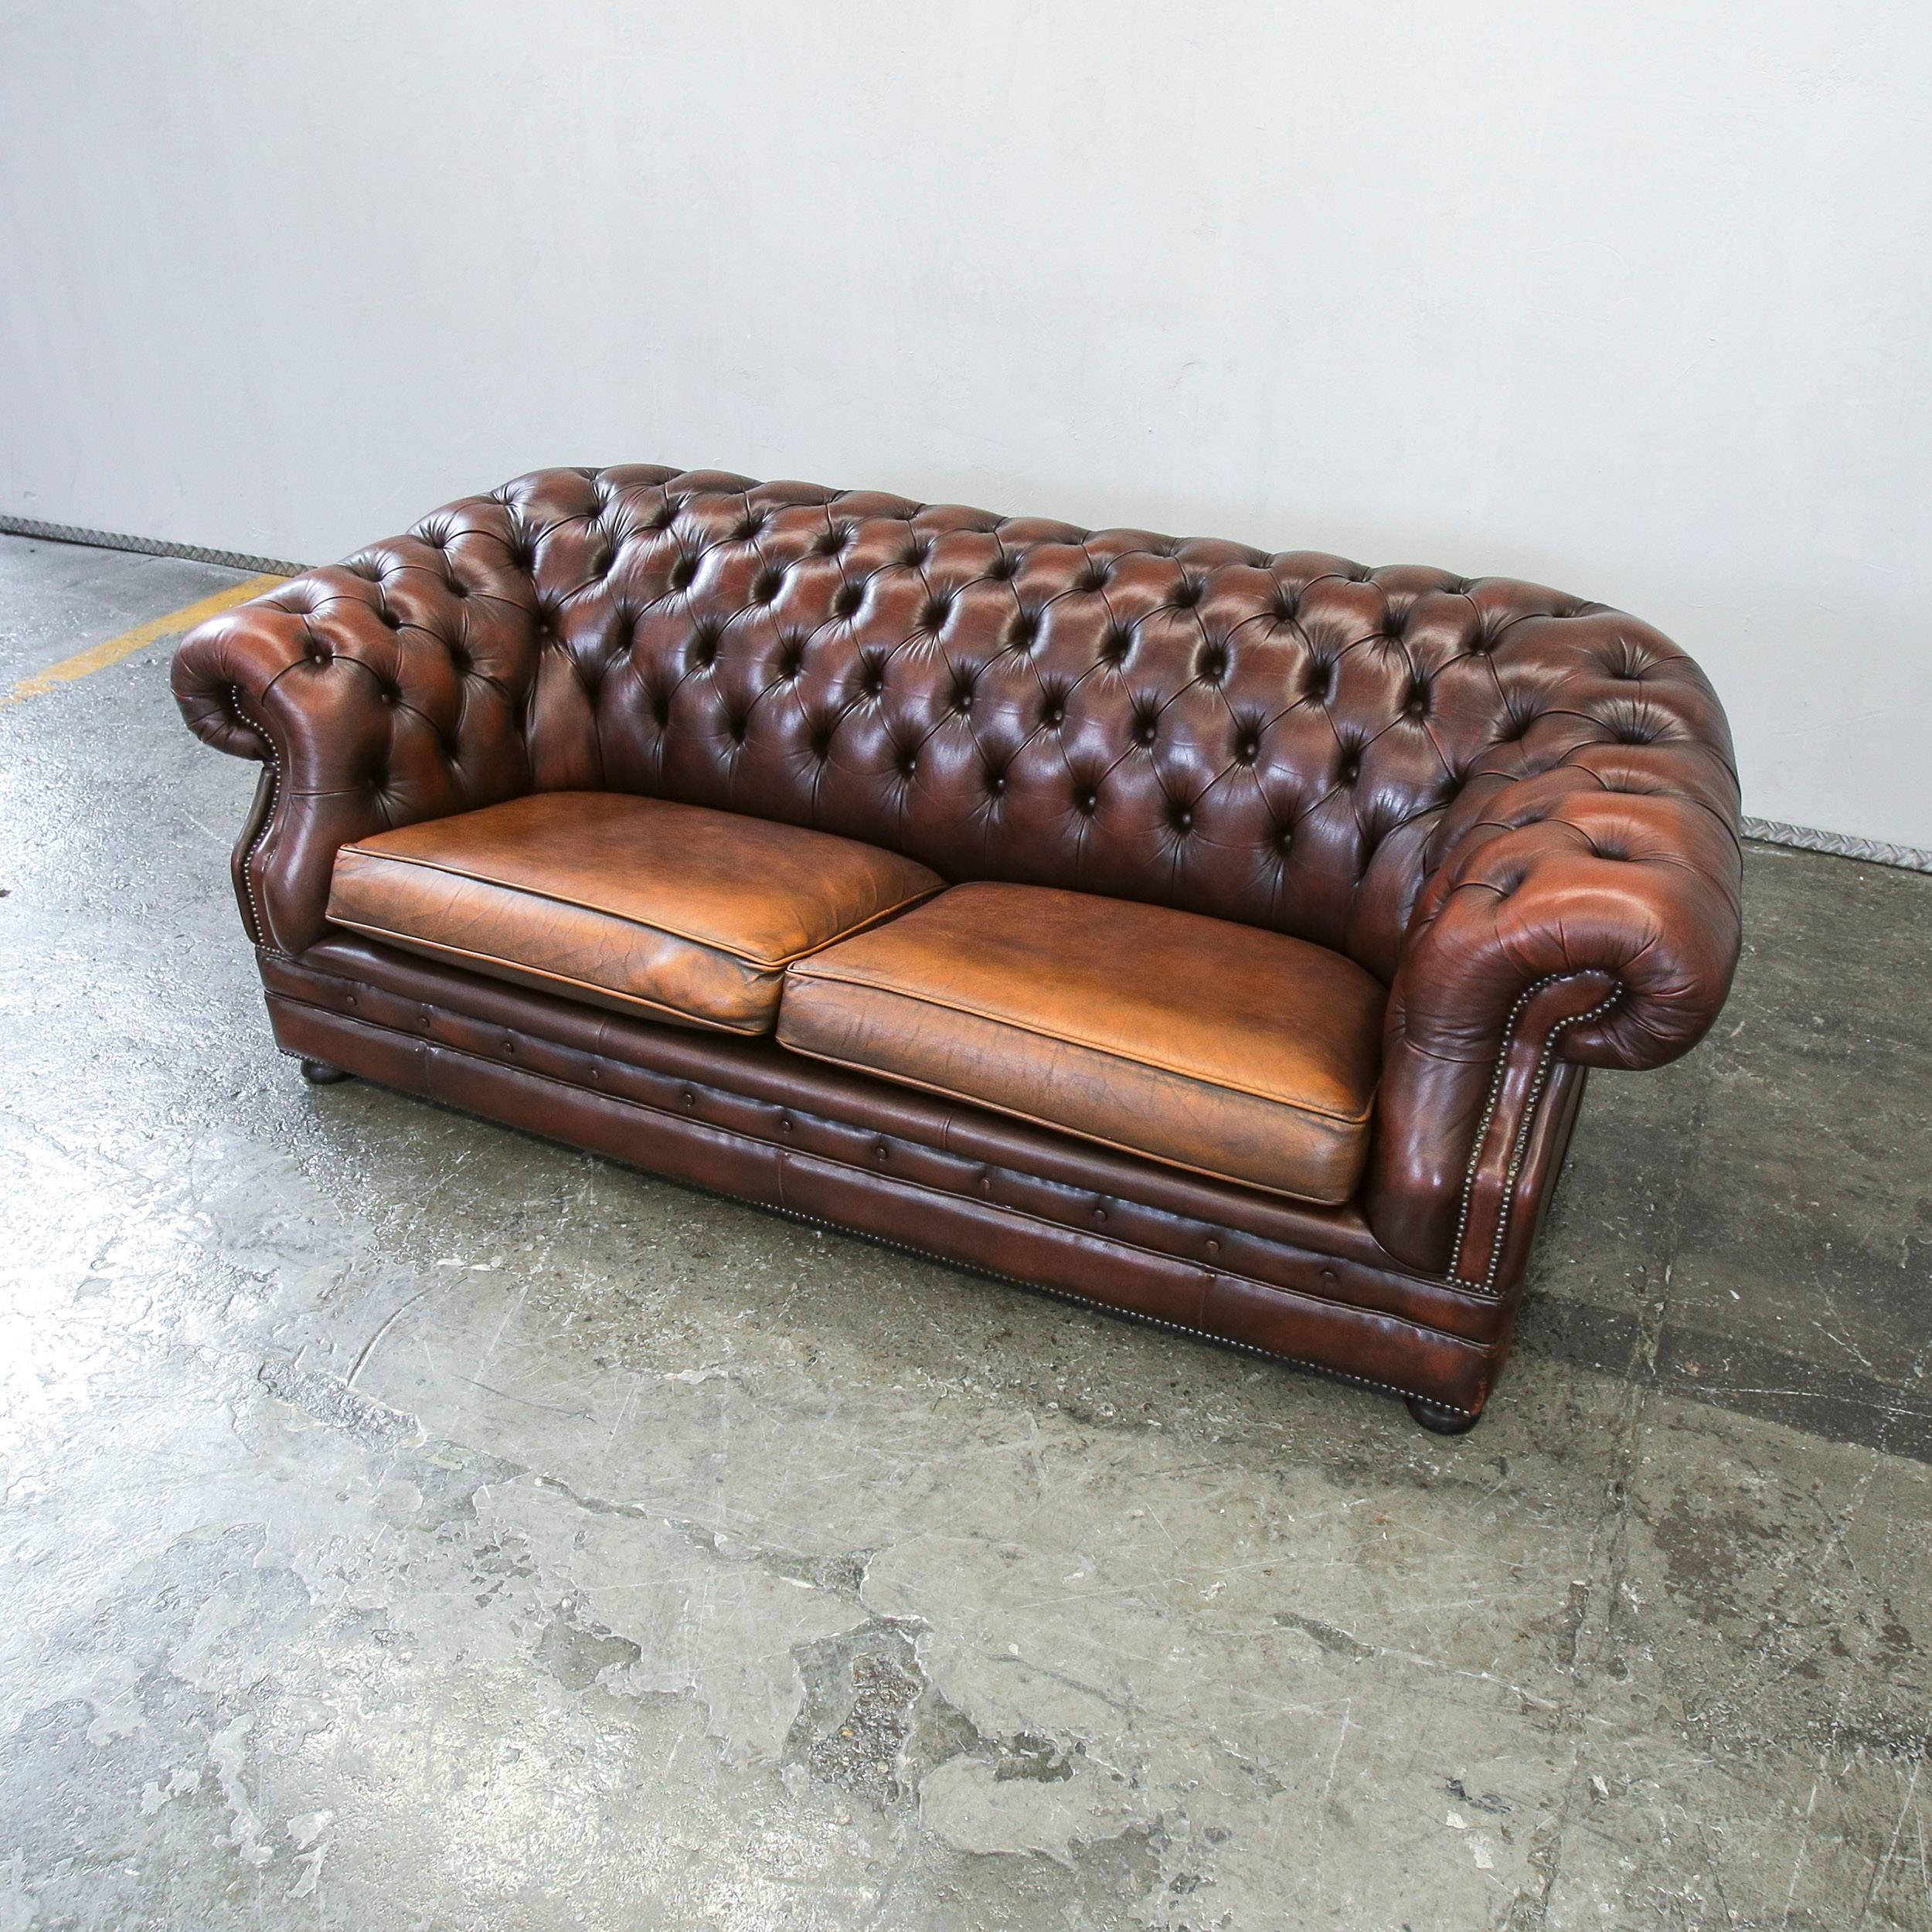 Brown colored Chesterfield leather sofa in an elegant vintage style, designed for pure comfort.